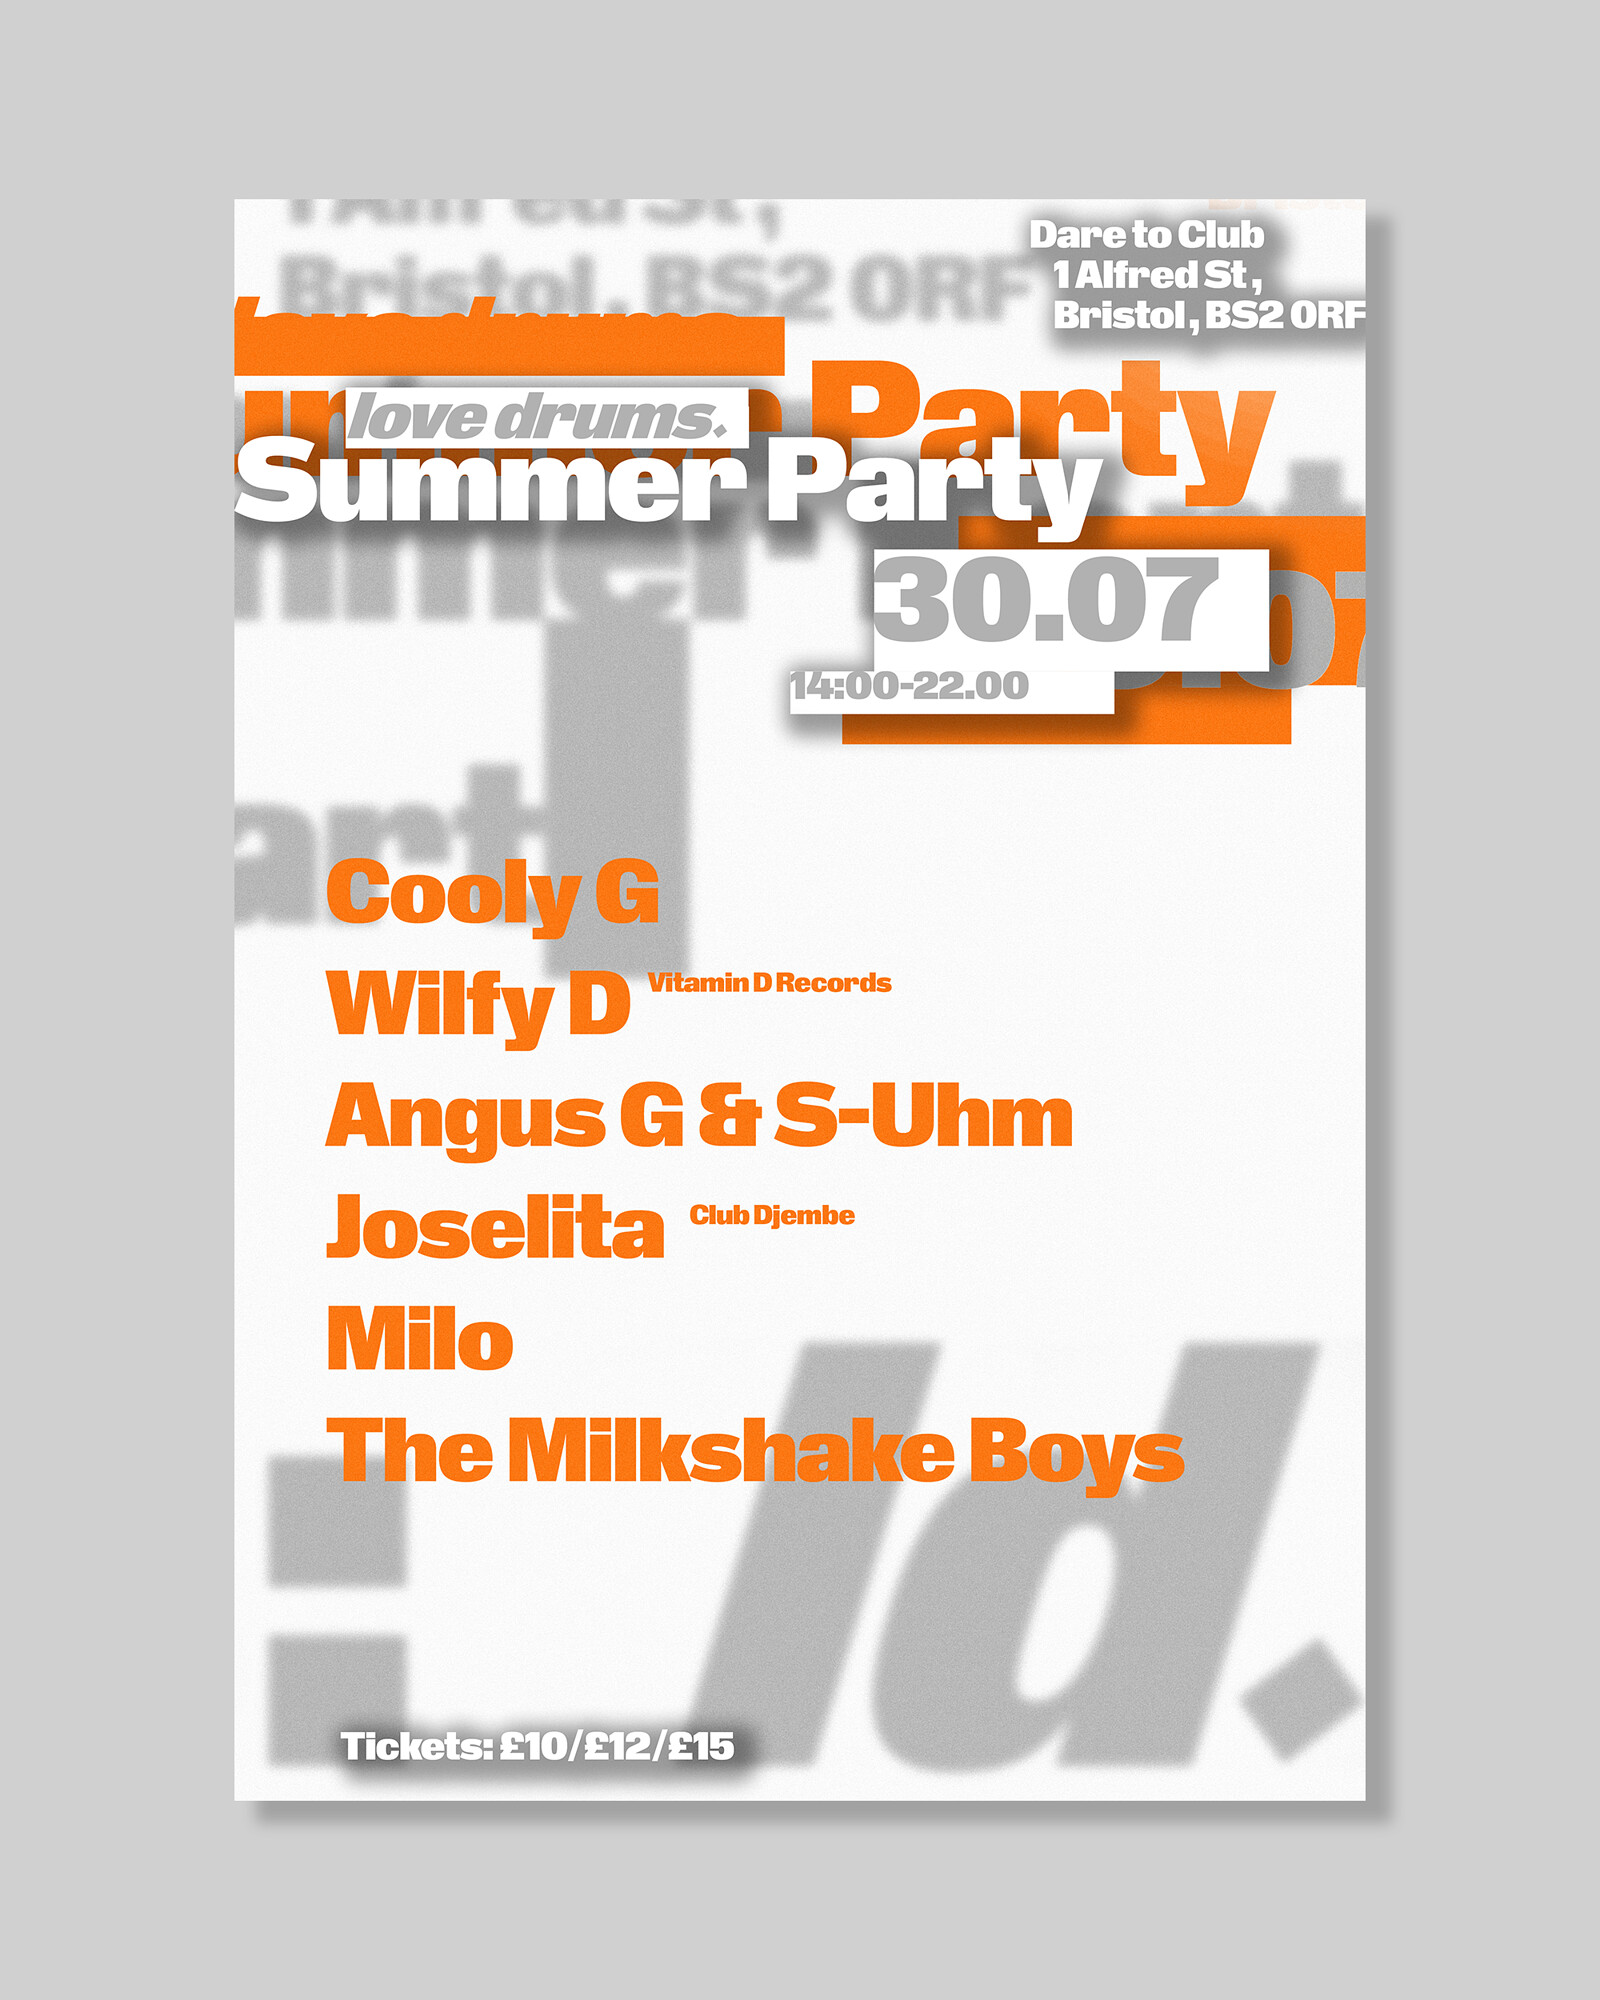 Love Drums Summer Day Party with Cooly G & Wilfy D at Dare to Club